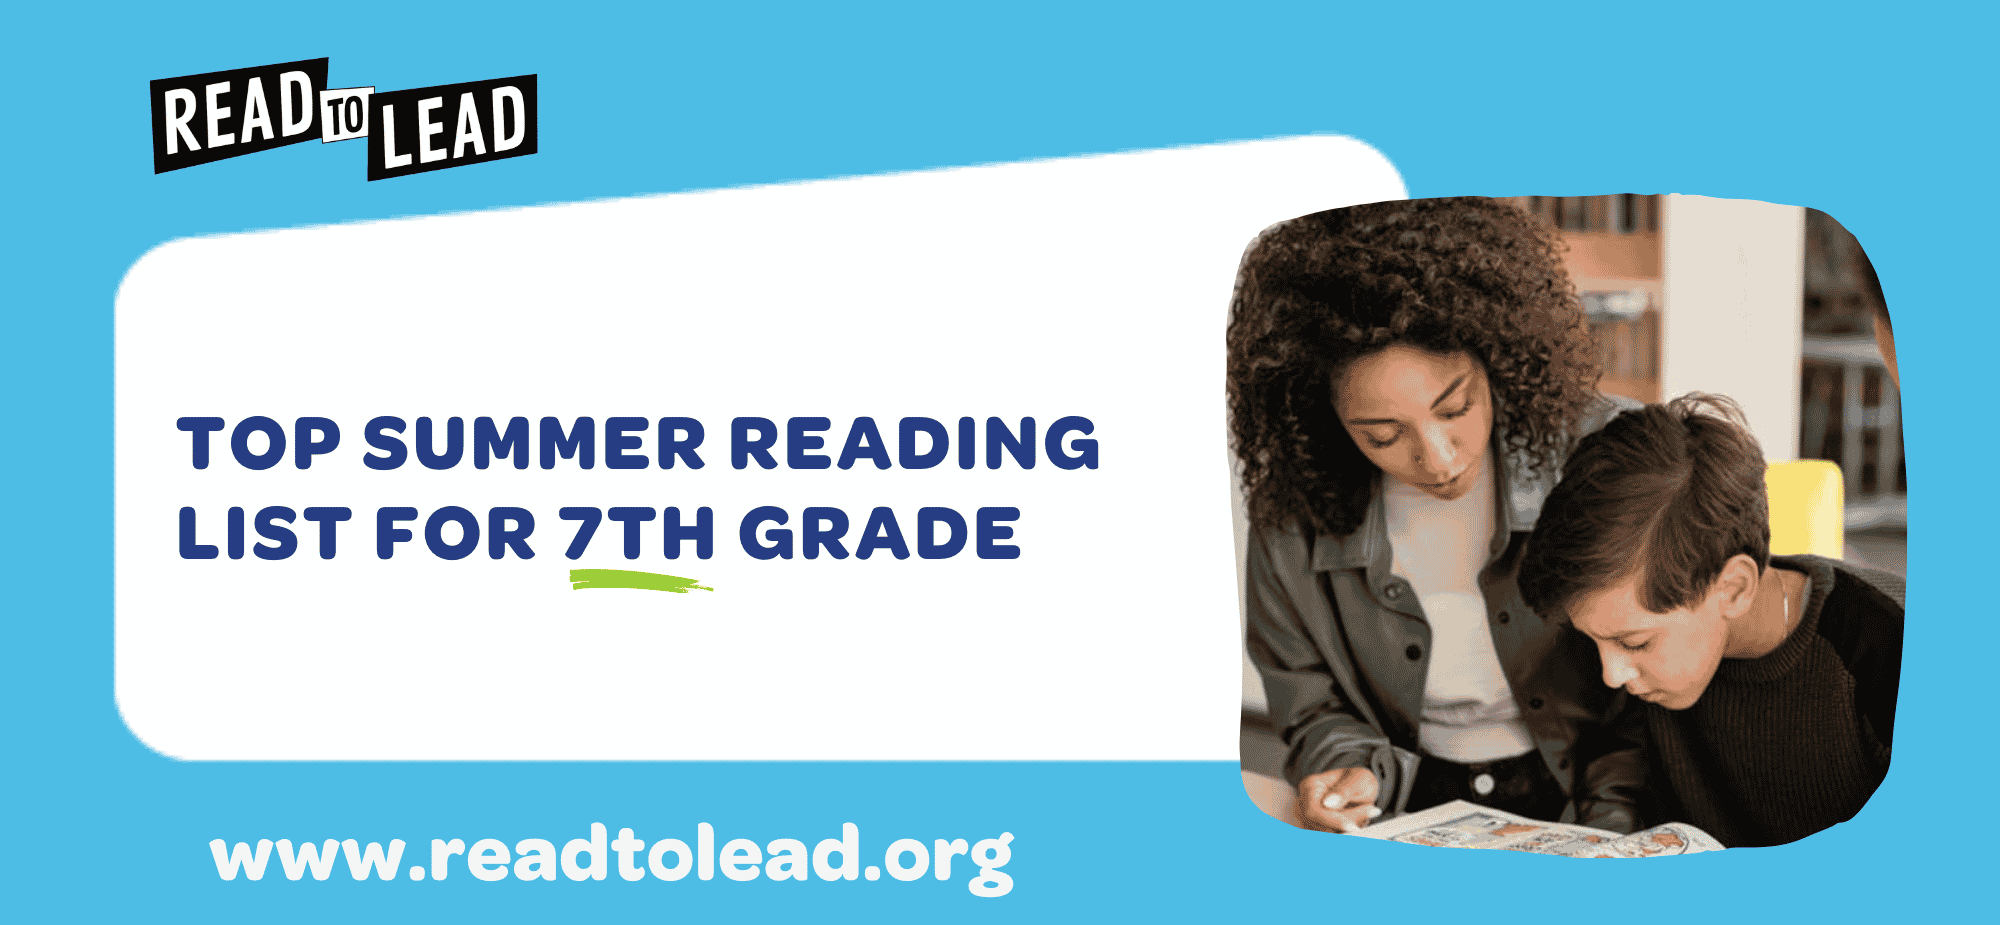 Top Summer Reading List for 7th Grade Read to Lead